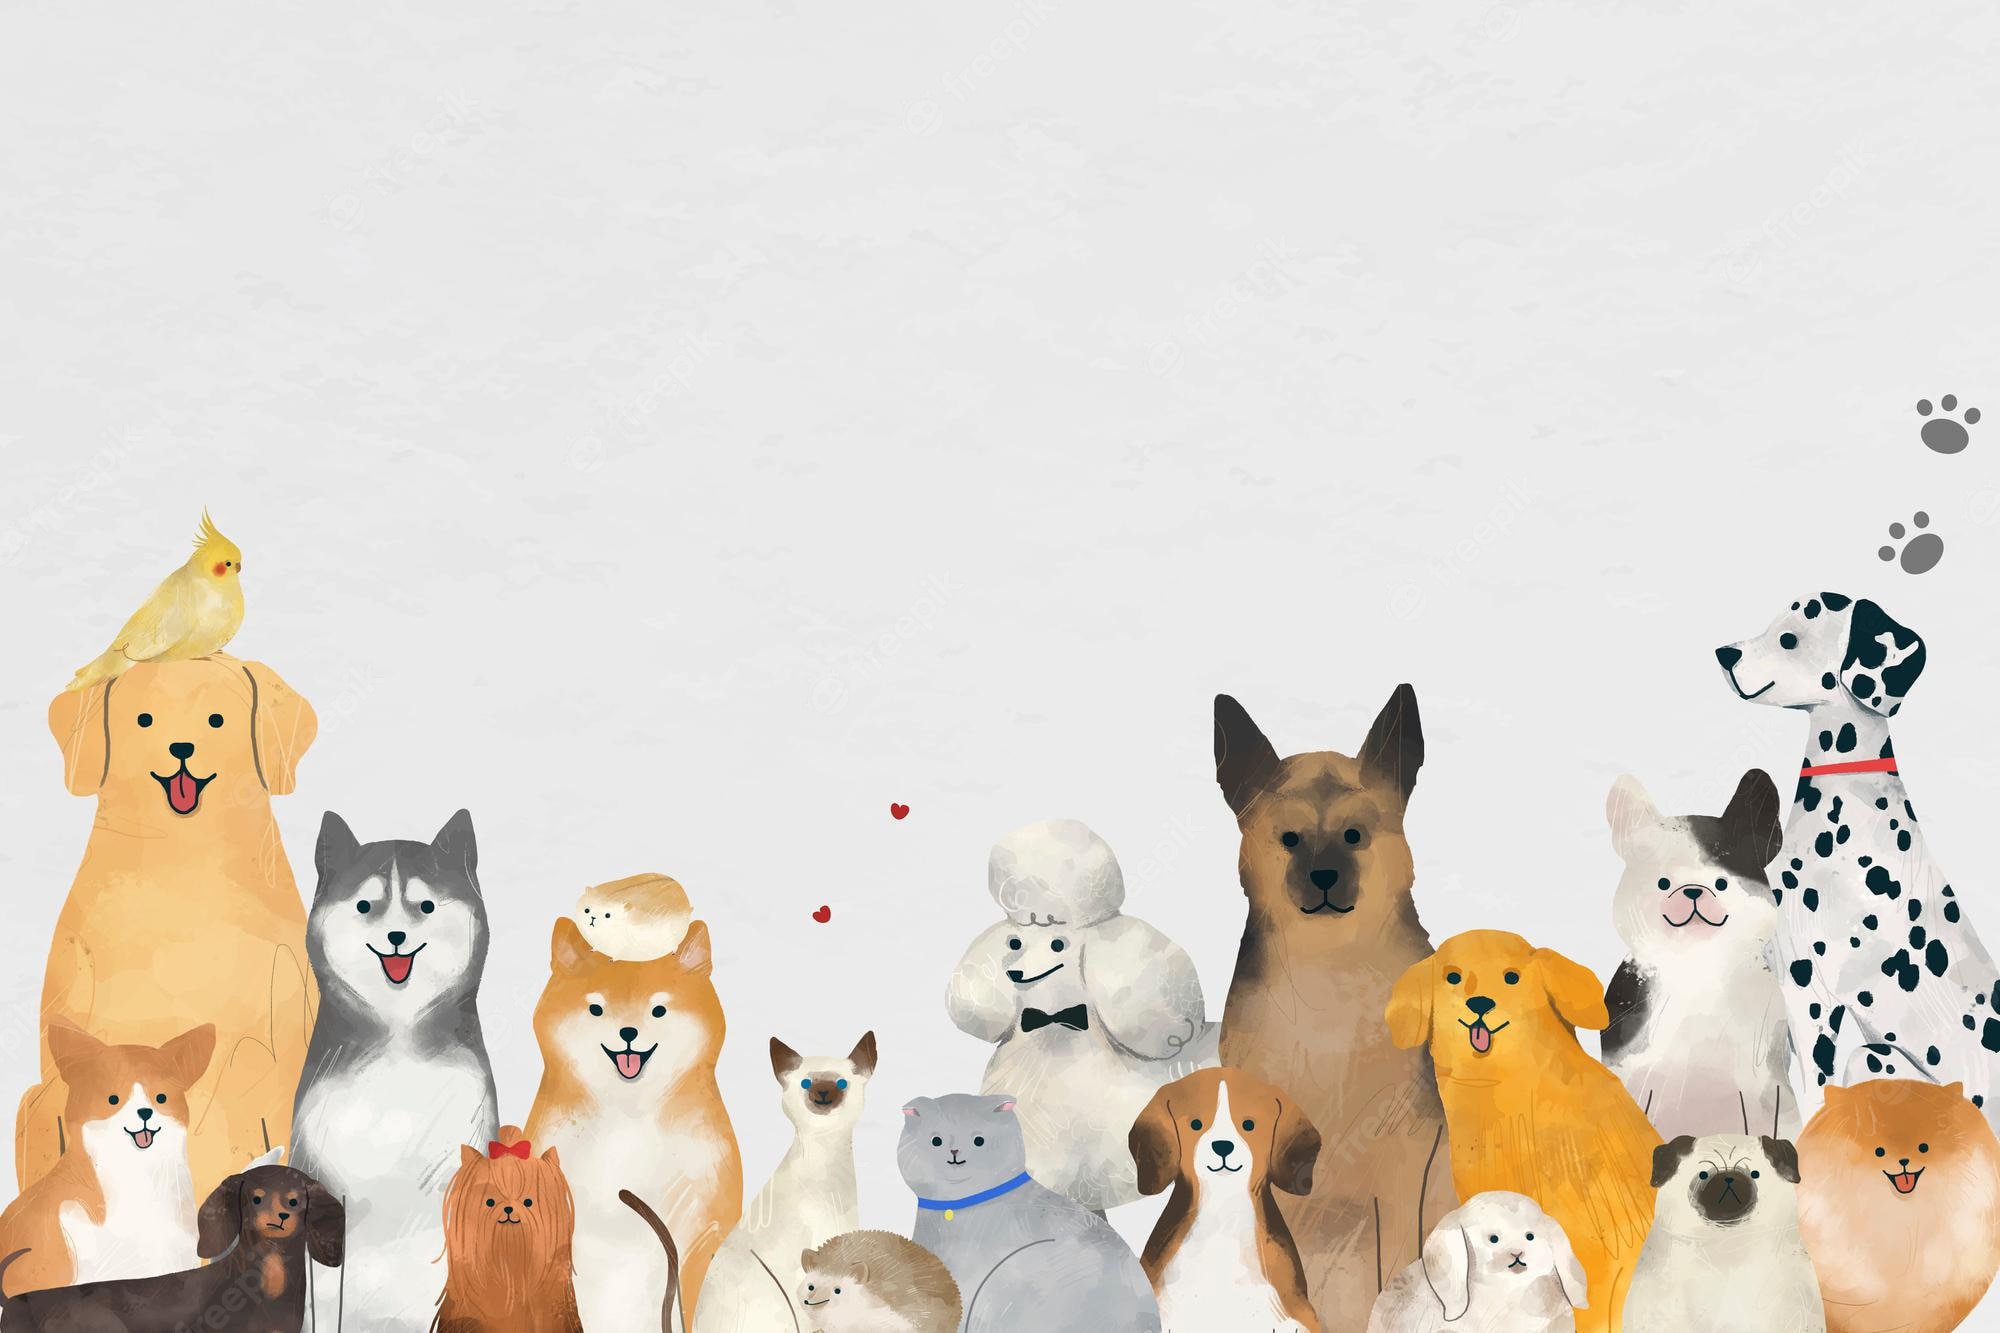 Free Vector. Animal background vector with cute pets illustration